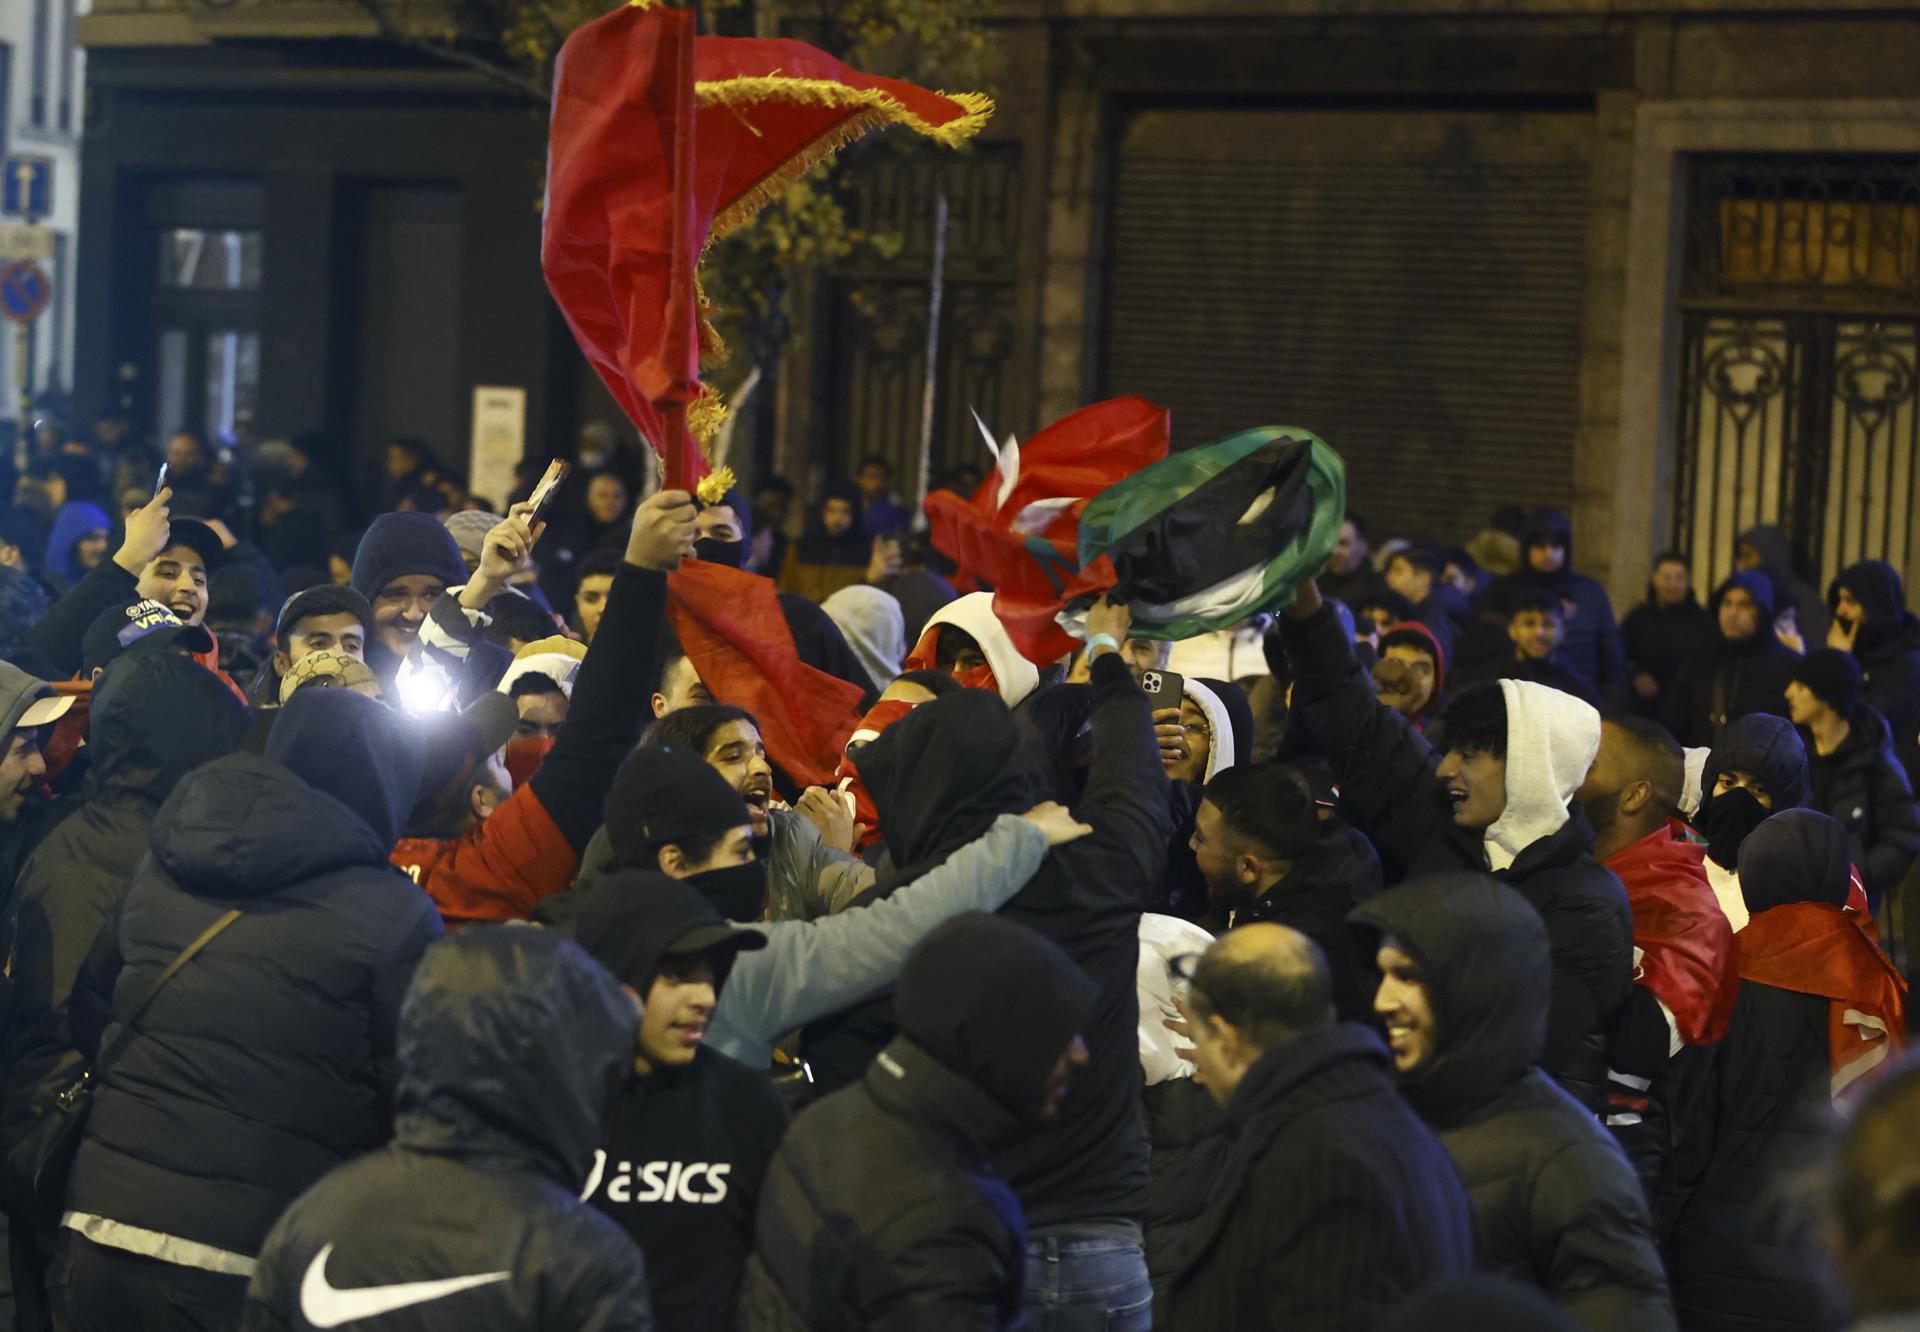 18 arrested for riots in Brussels during the celebrations for Morocco’s pass to the round of 16 of the Qatar 2022 World Cup